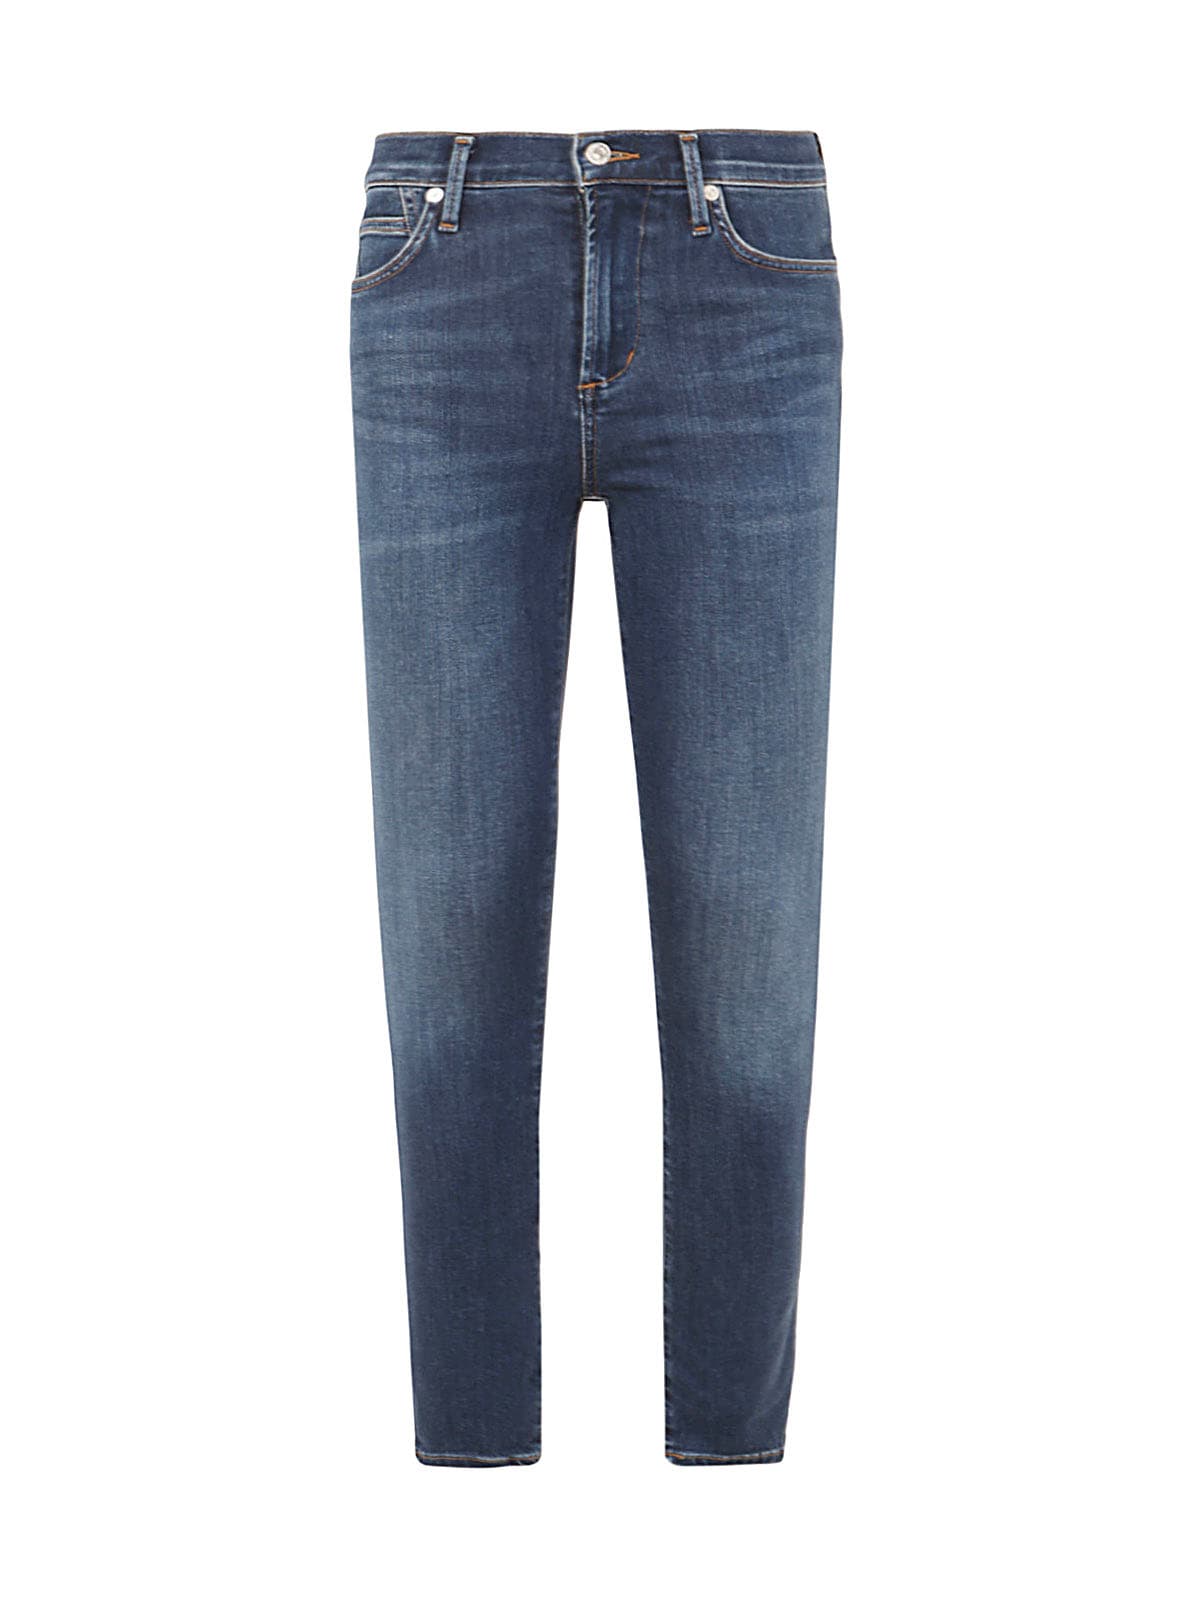 Citizens of Humanity Rocket Jeans